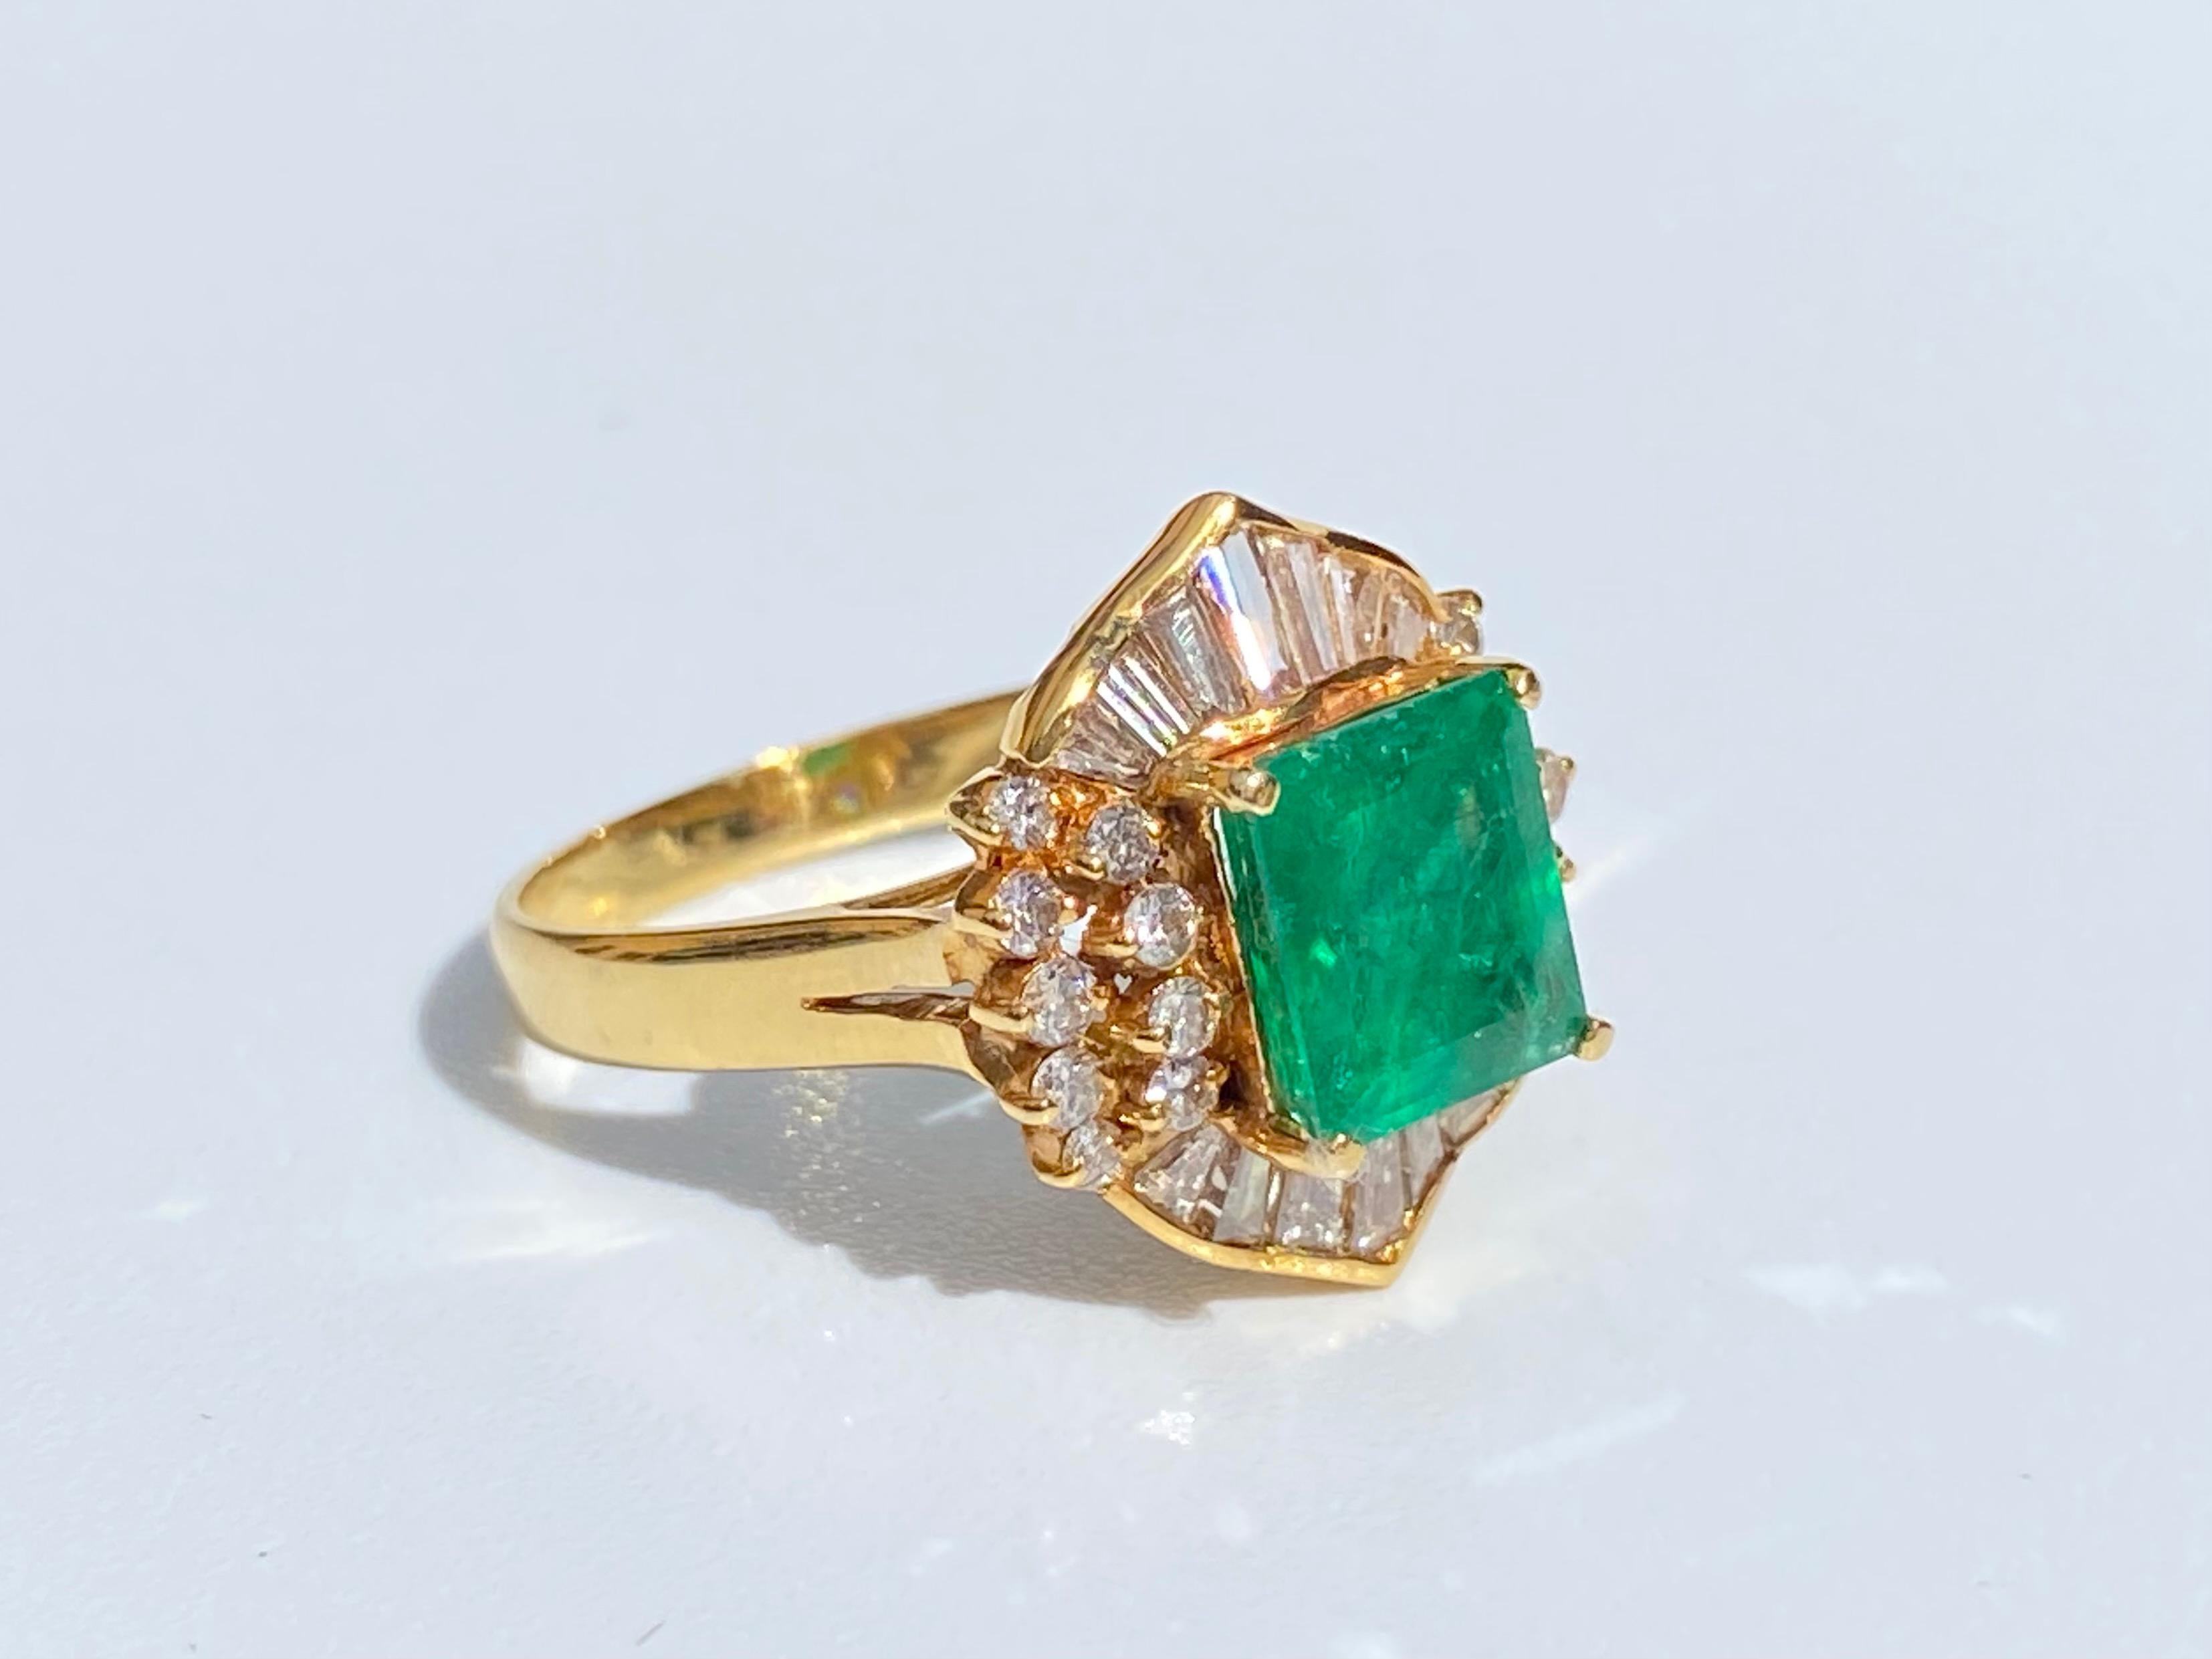 1.62 Carat Emerald-Cut Colombian Emerald and Diamond 18 Karat Yellow Gold Ring In Excellent Condition For Sale In Miami, FL